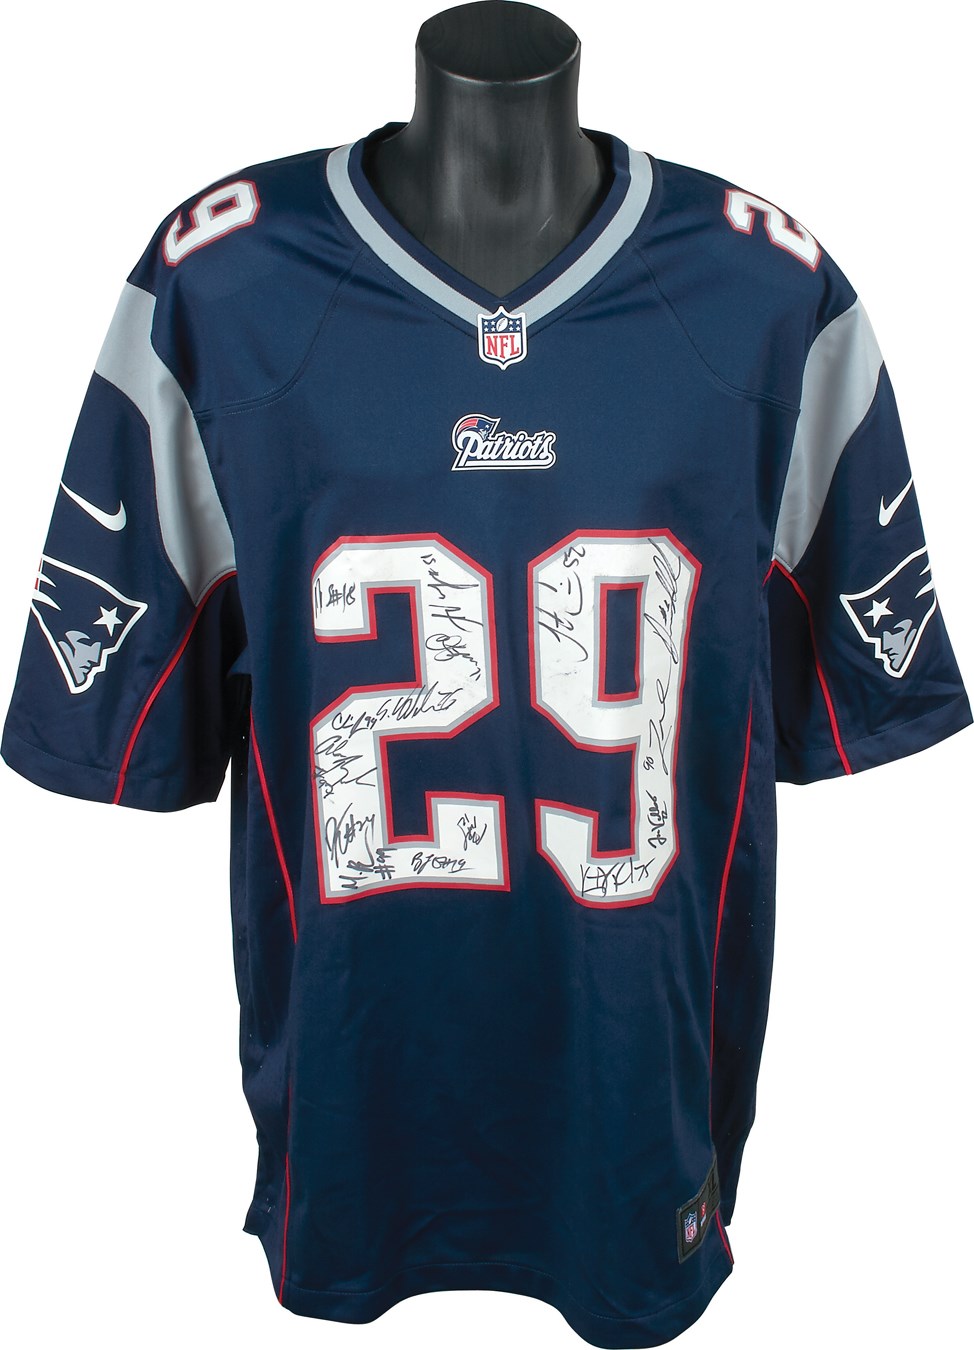 Football - "Deflategate" Super Bowl XLIX Champion New England Patriots Team-Signed Jersey - Gifted to Longtime Team Employee (PSA)